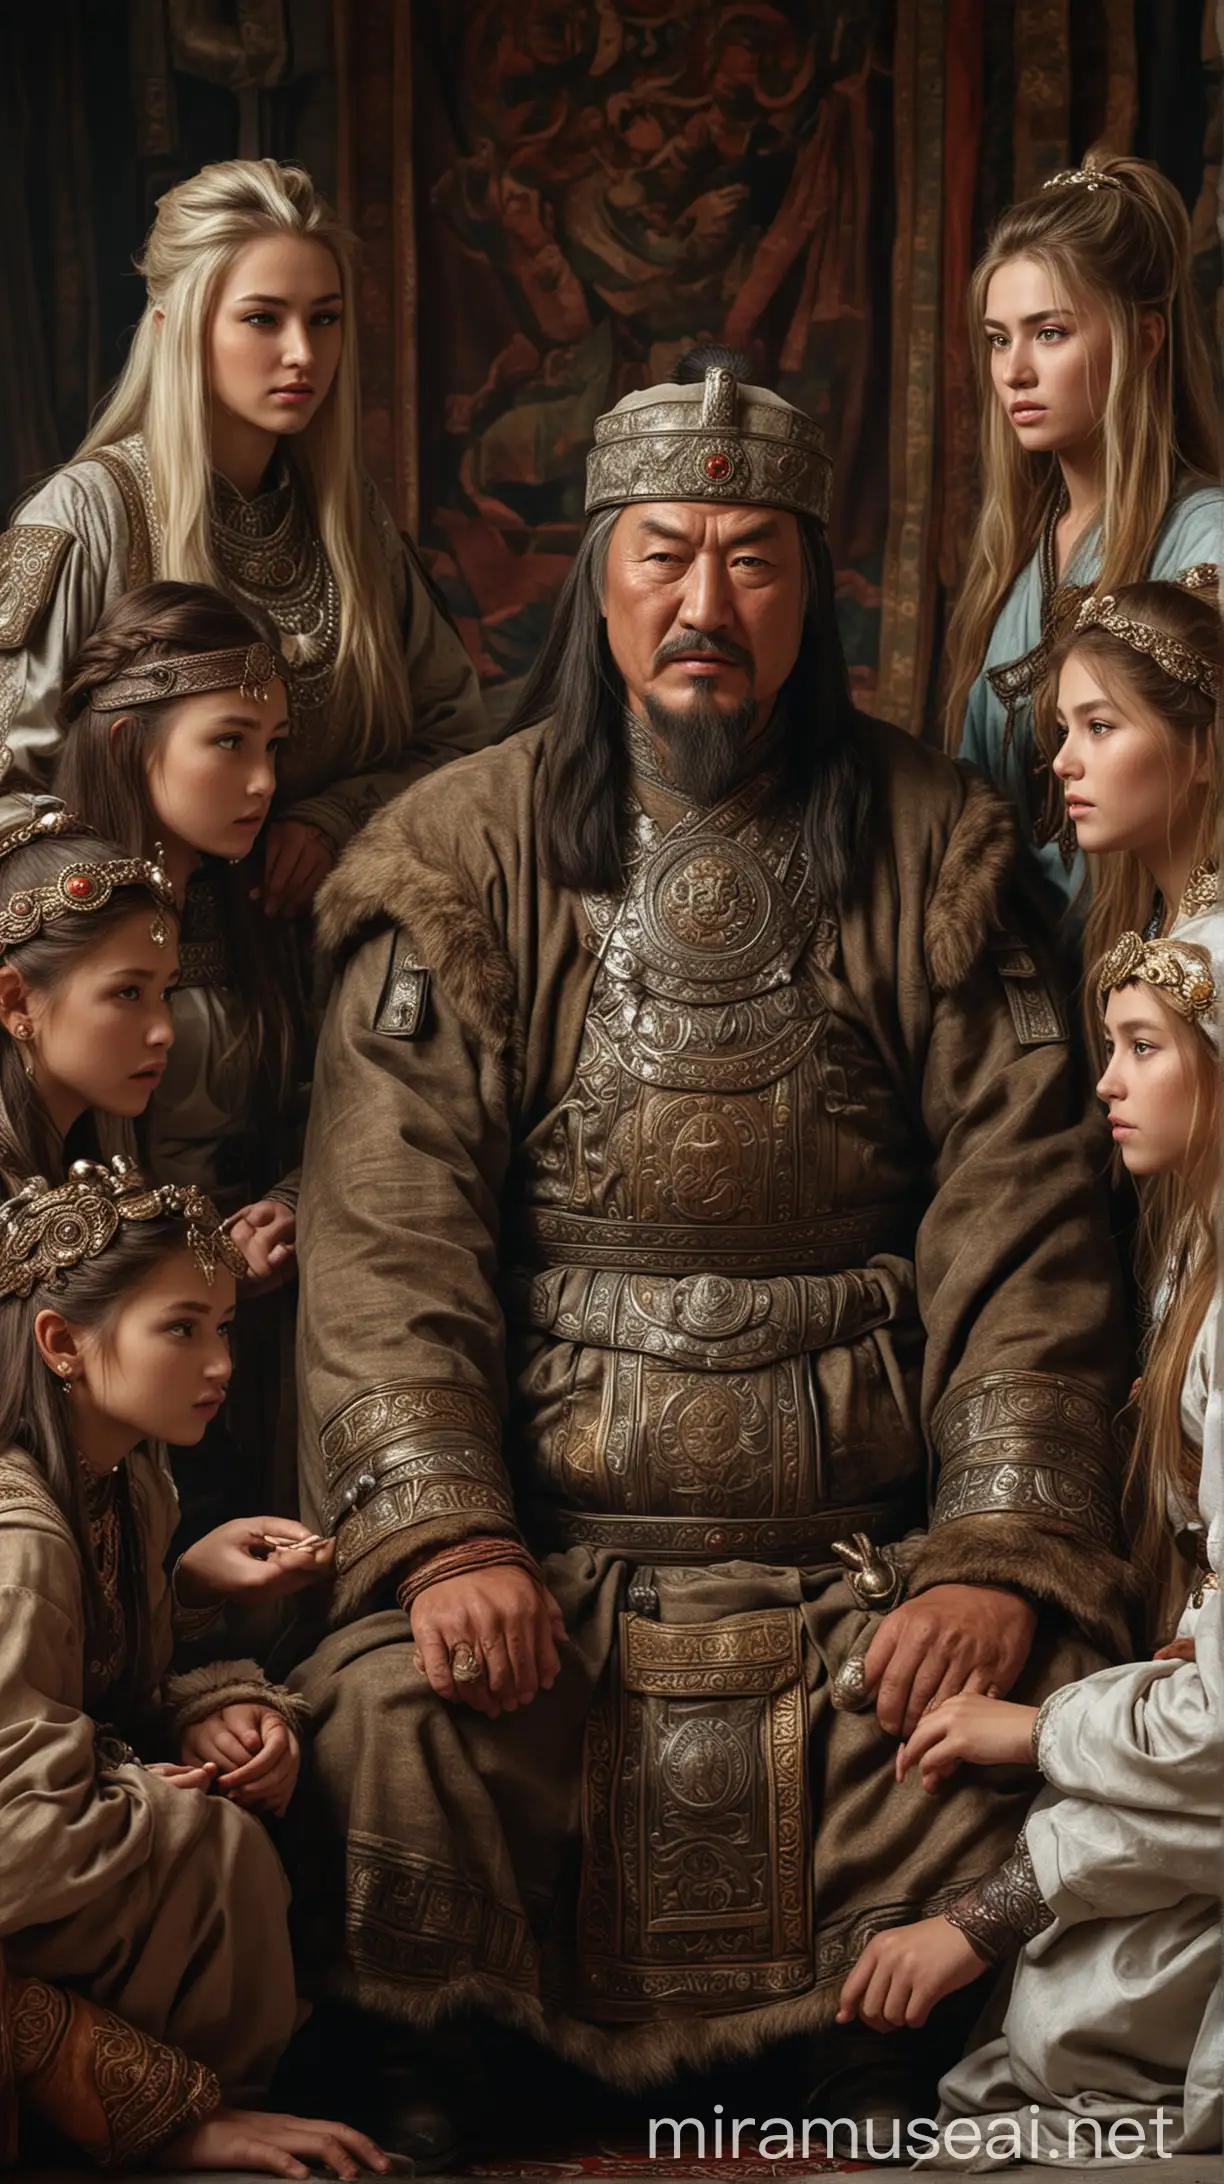 Genghis Khan with Daughters Strategizing Hyper Realistic Historical Artwork